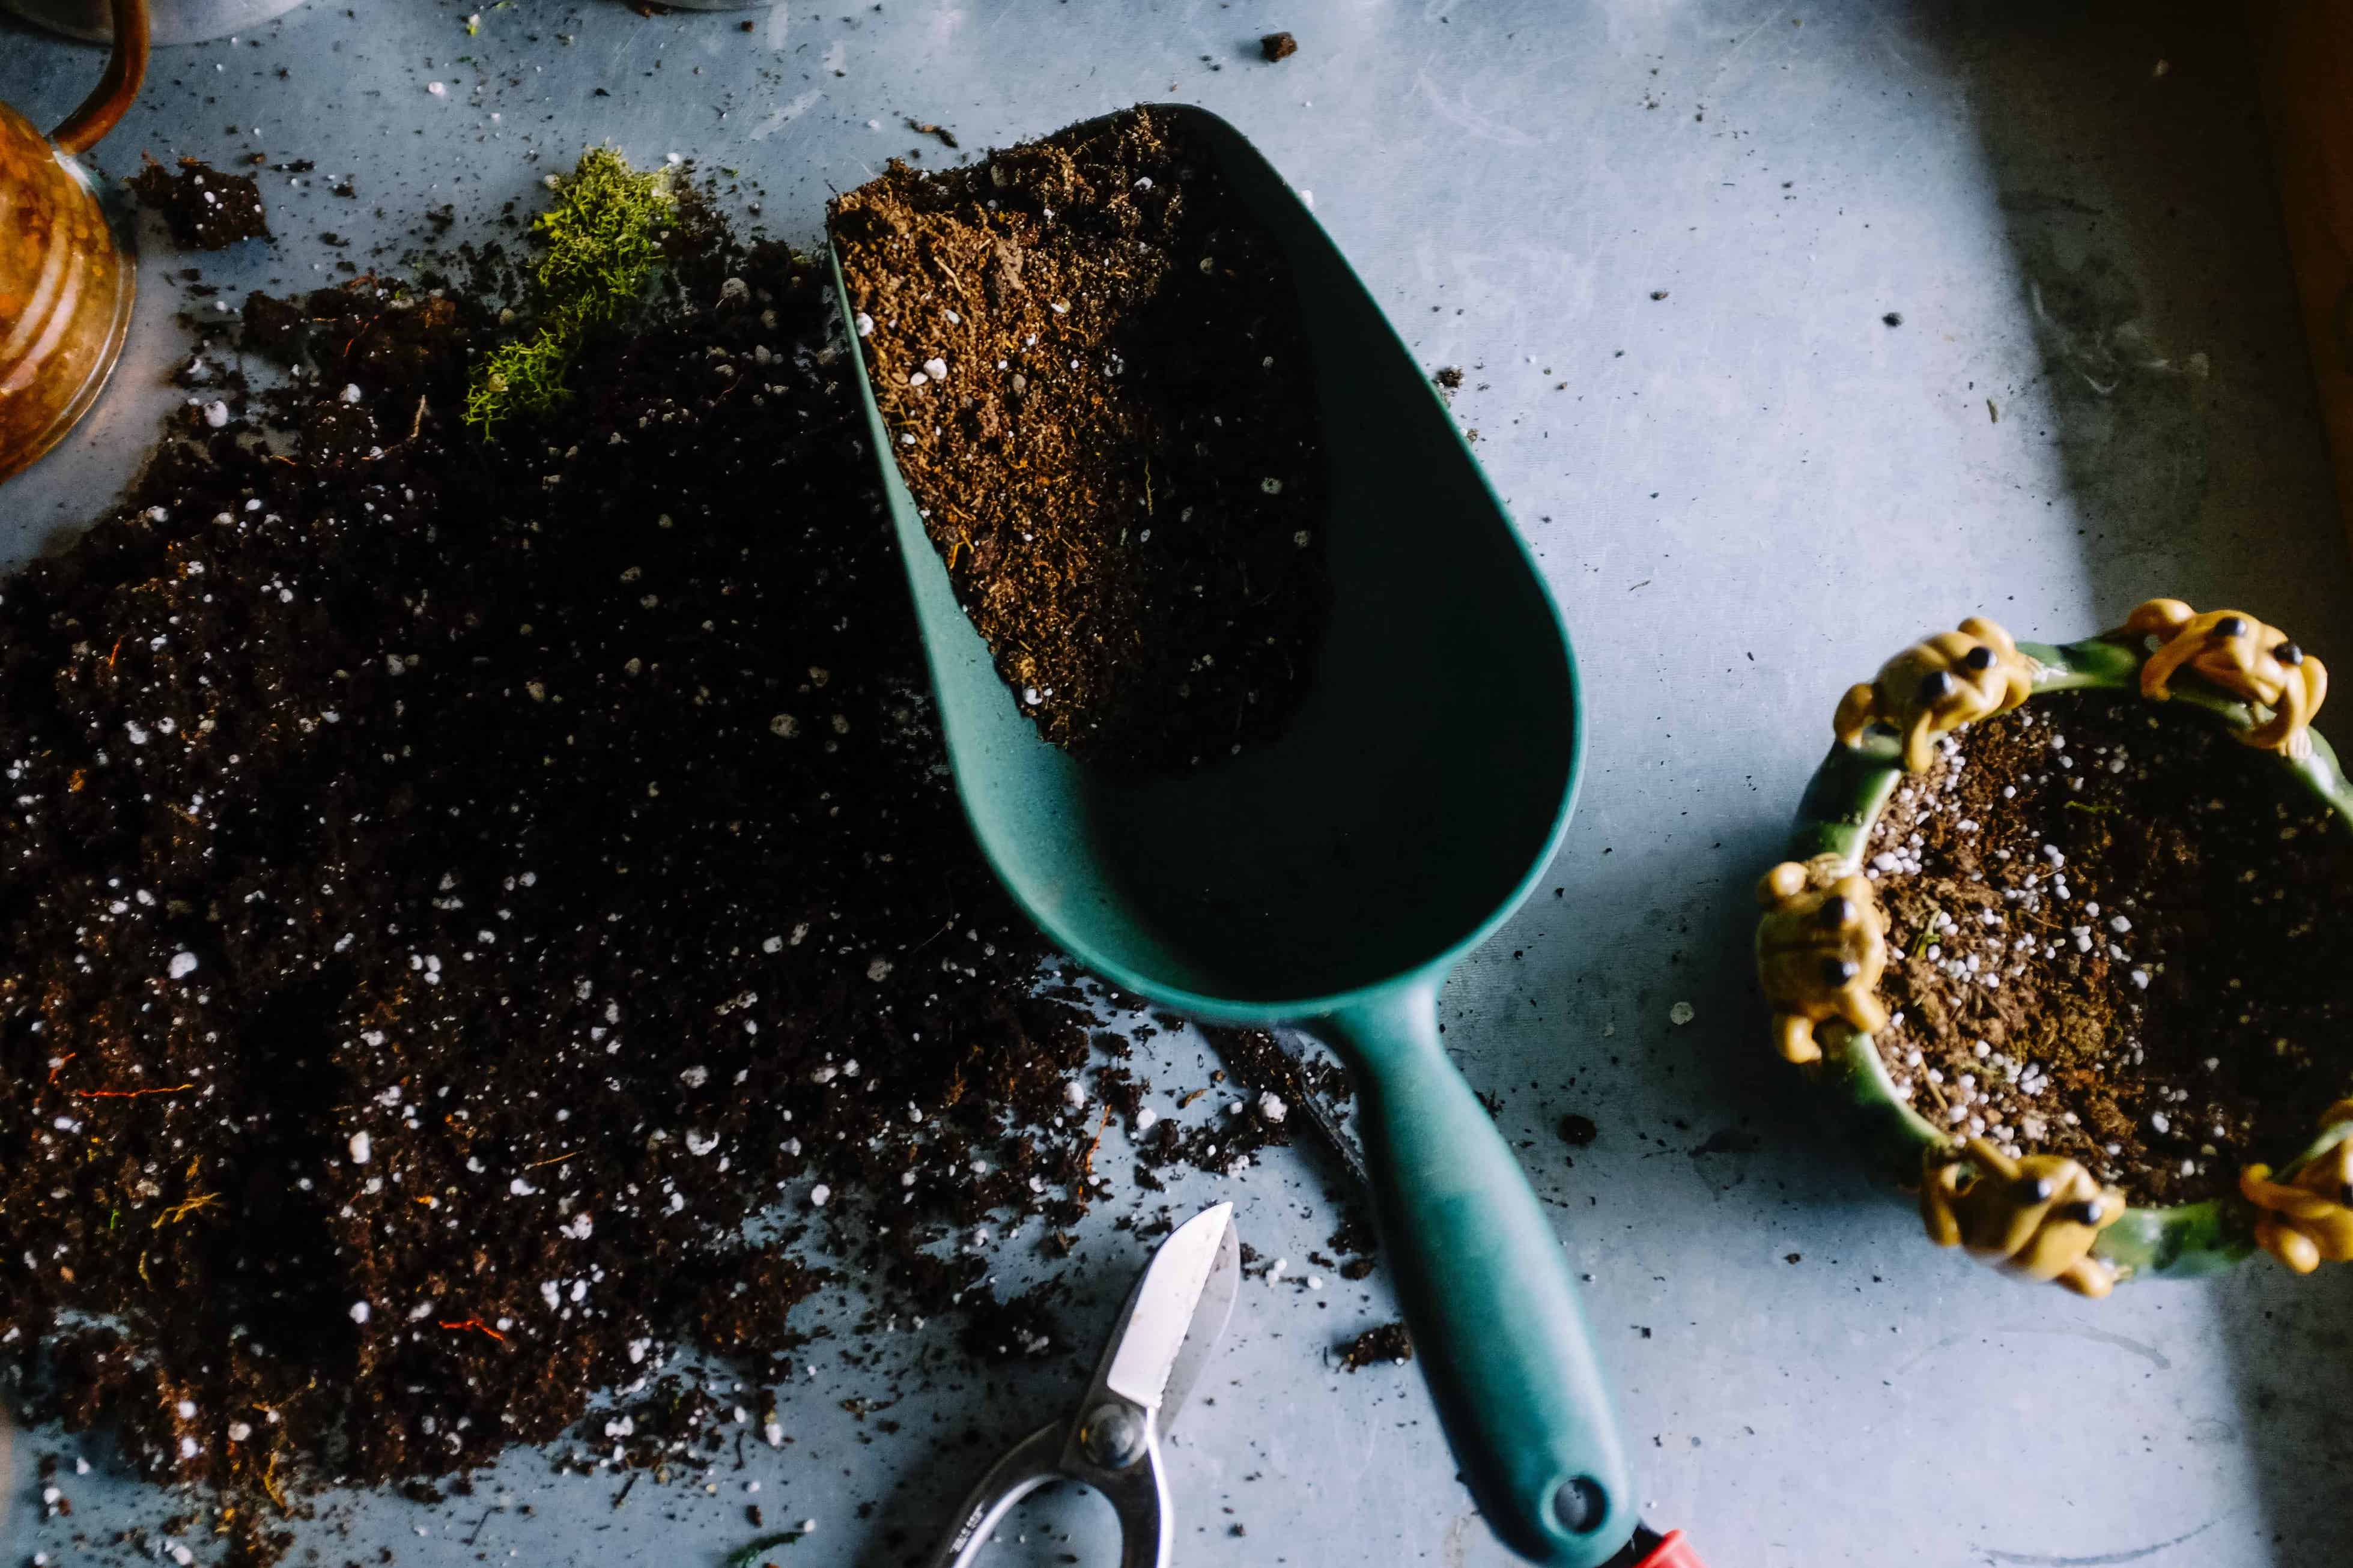 How to Make Your Own Apartment Compost